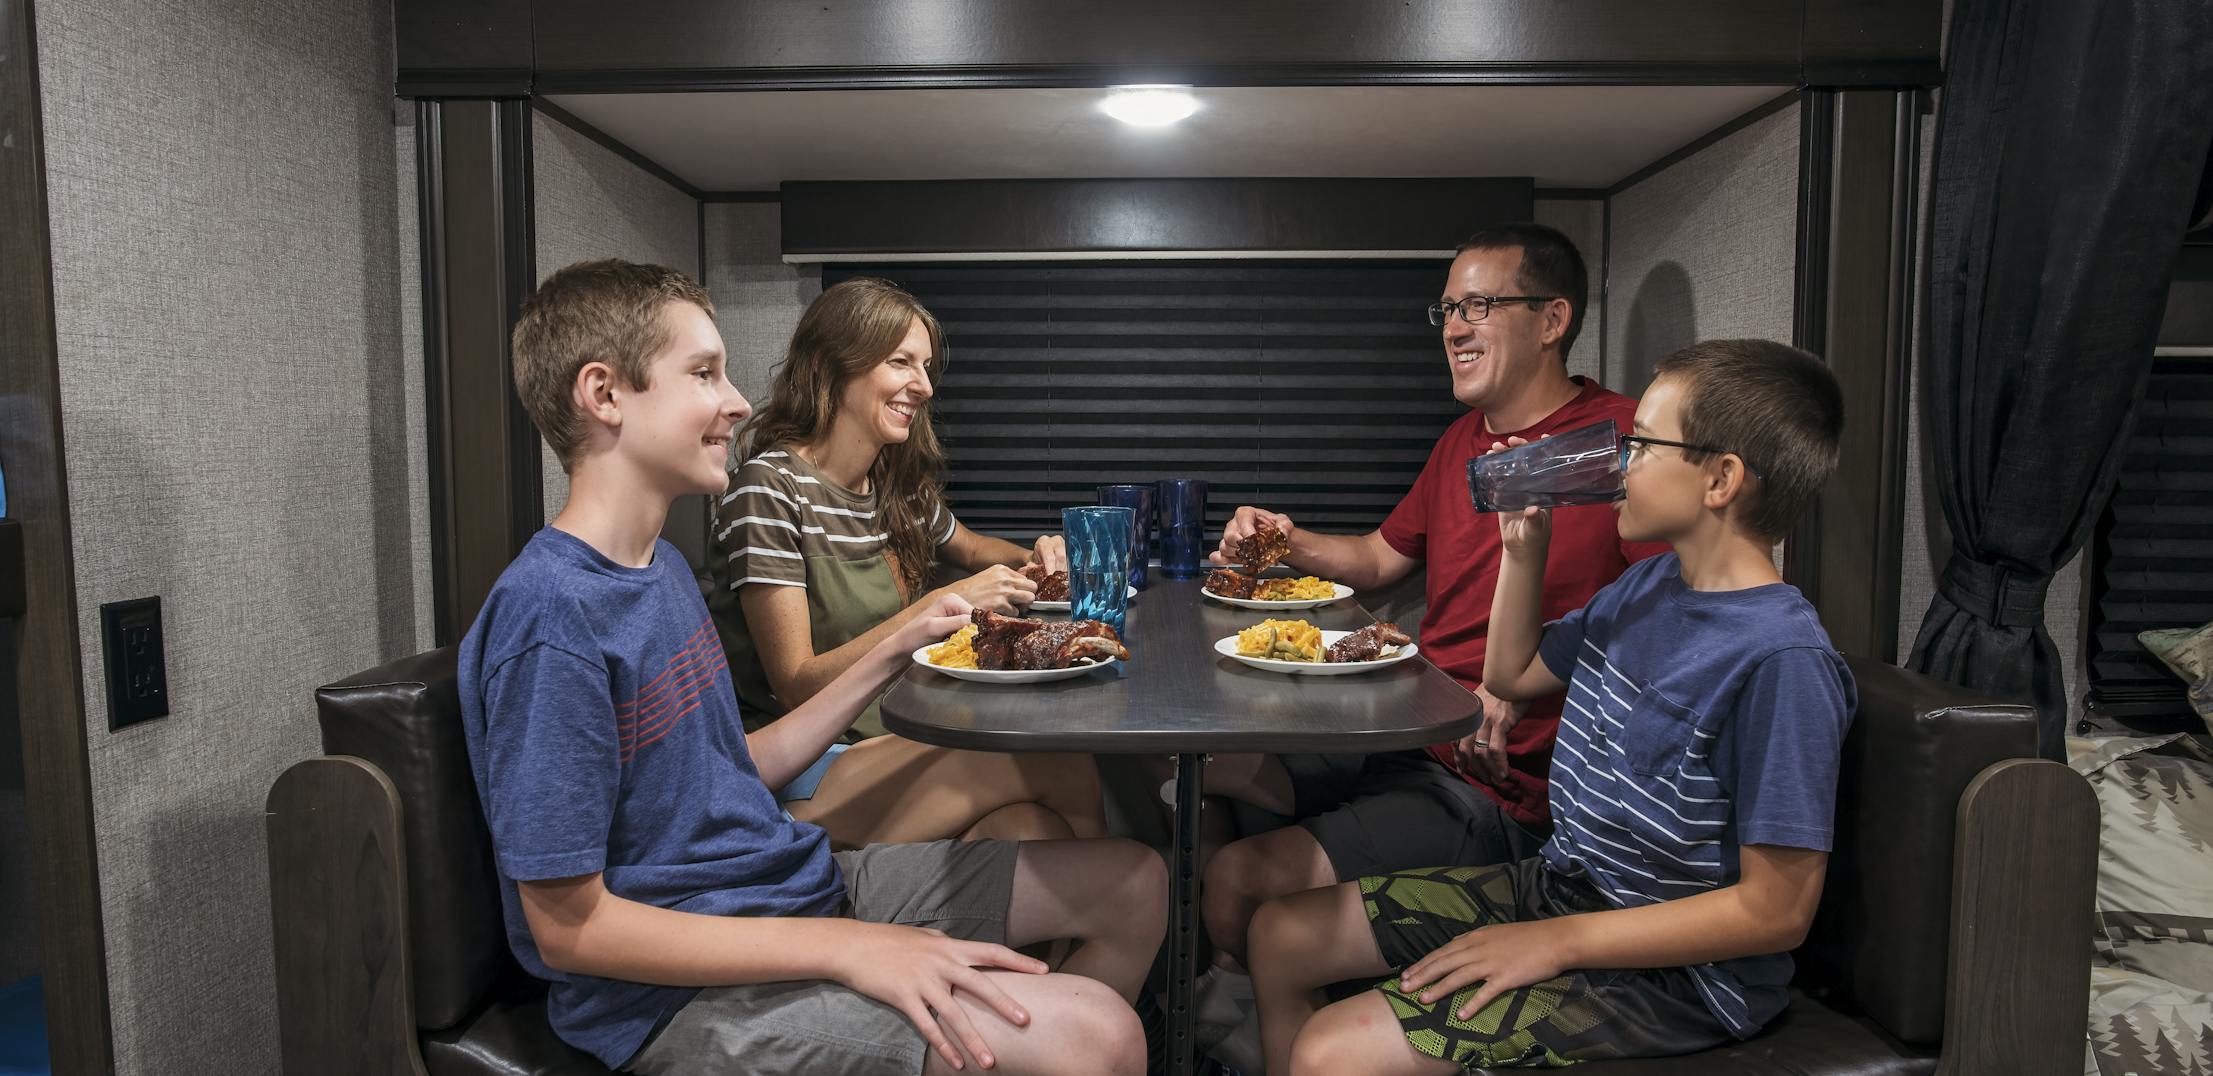 Alison Takacs and her family eating dinner at the dinette inside their RV